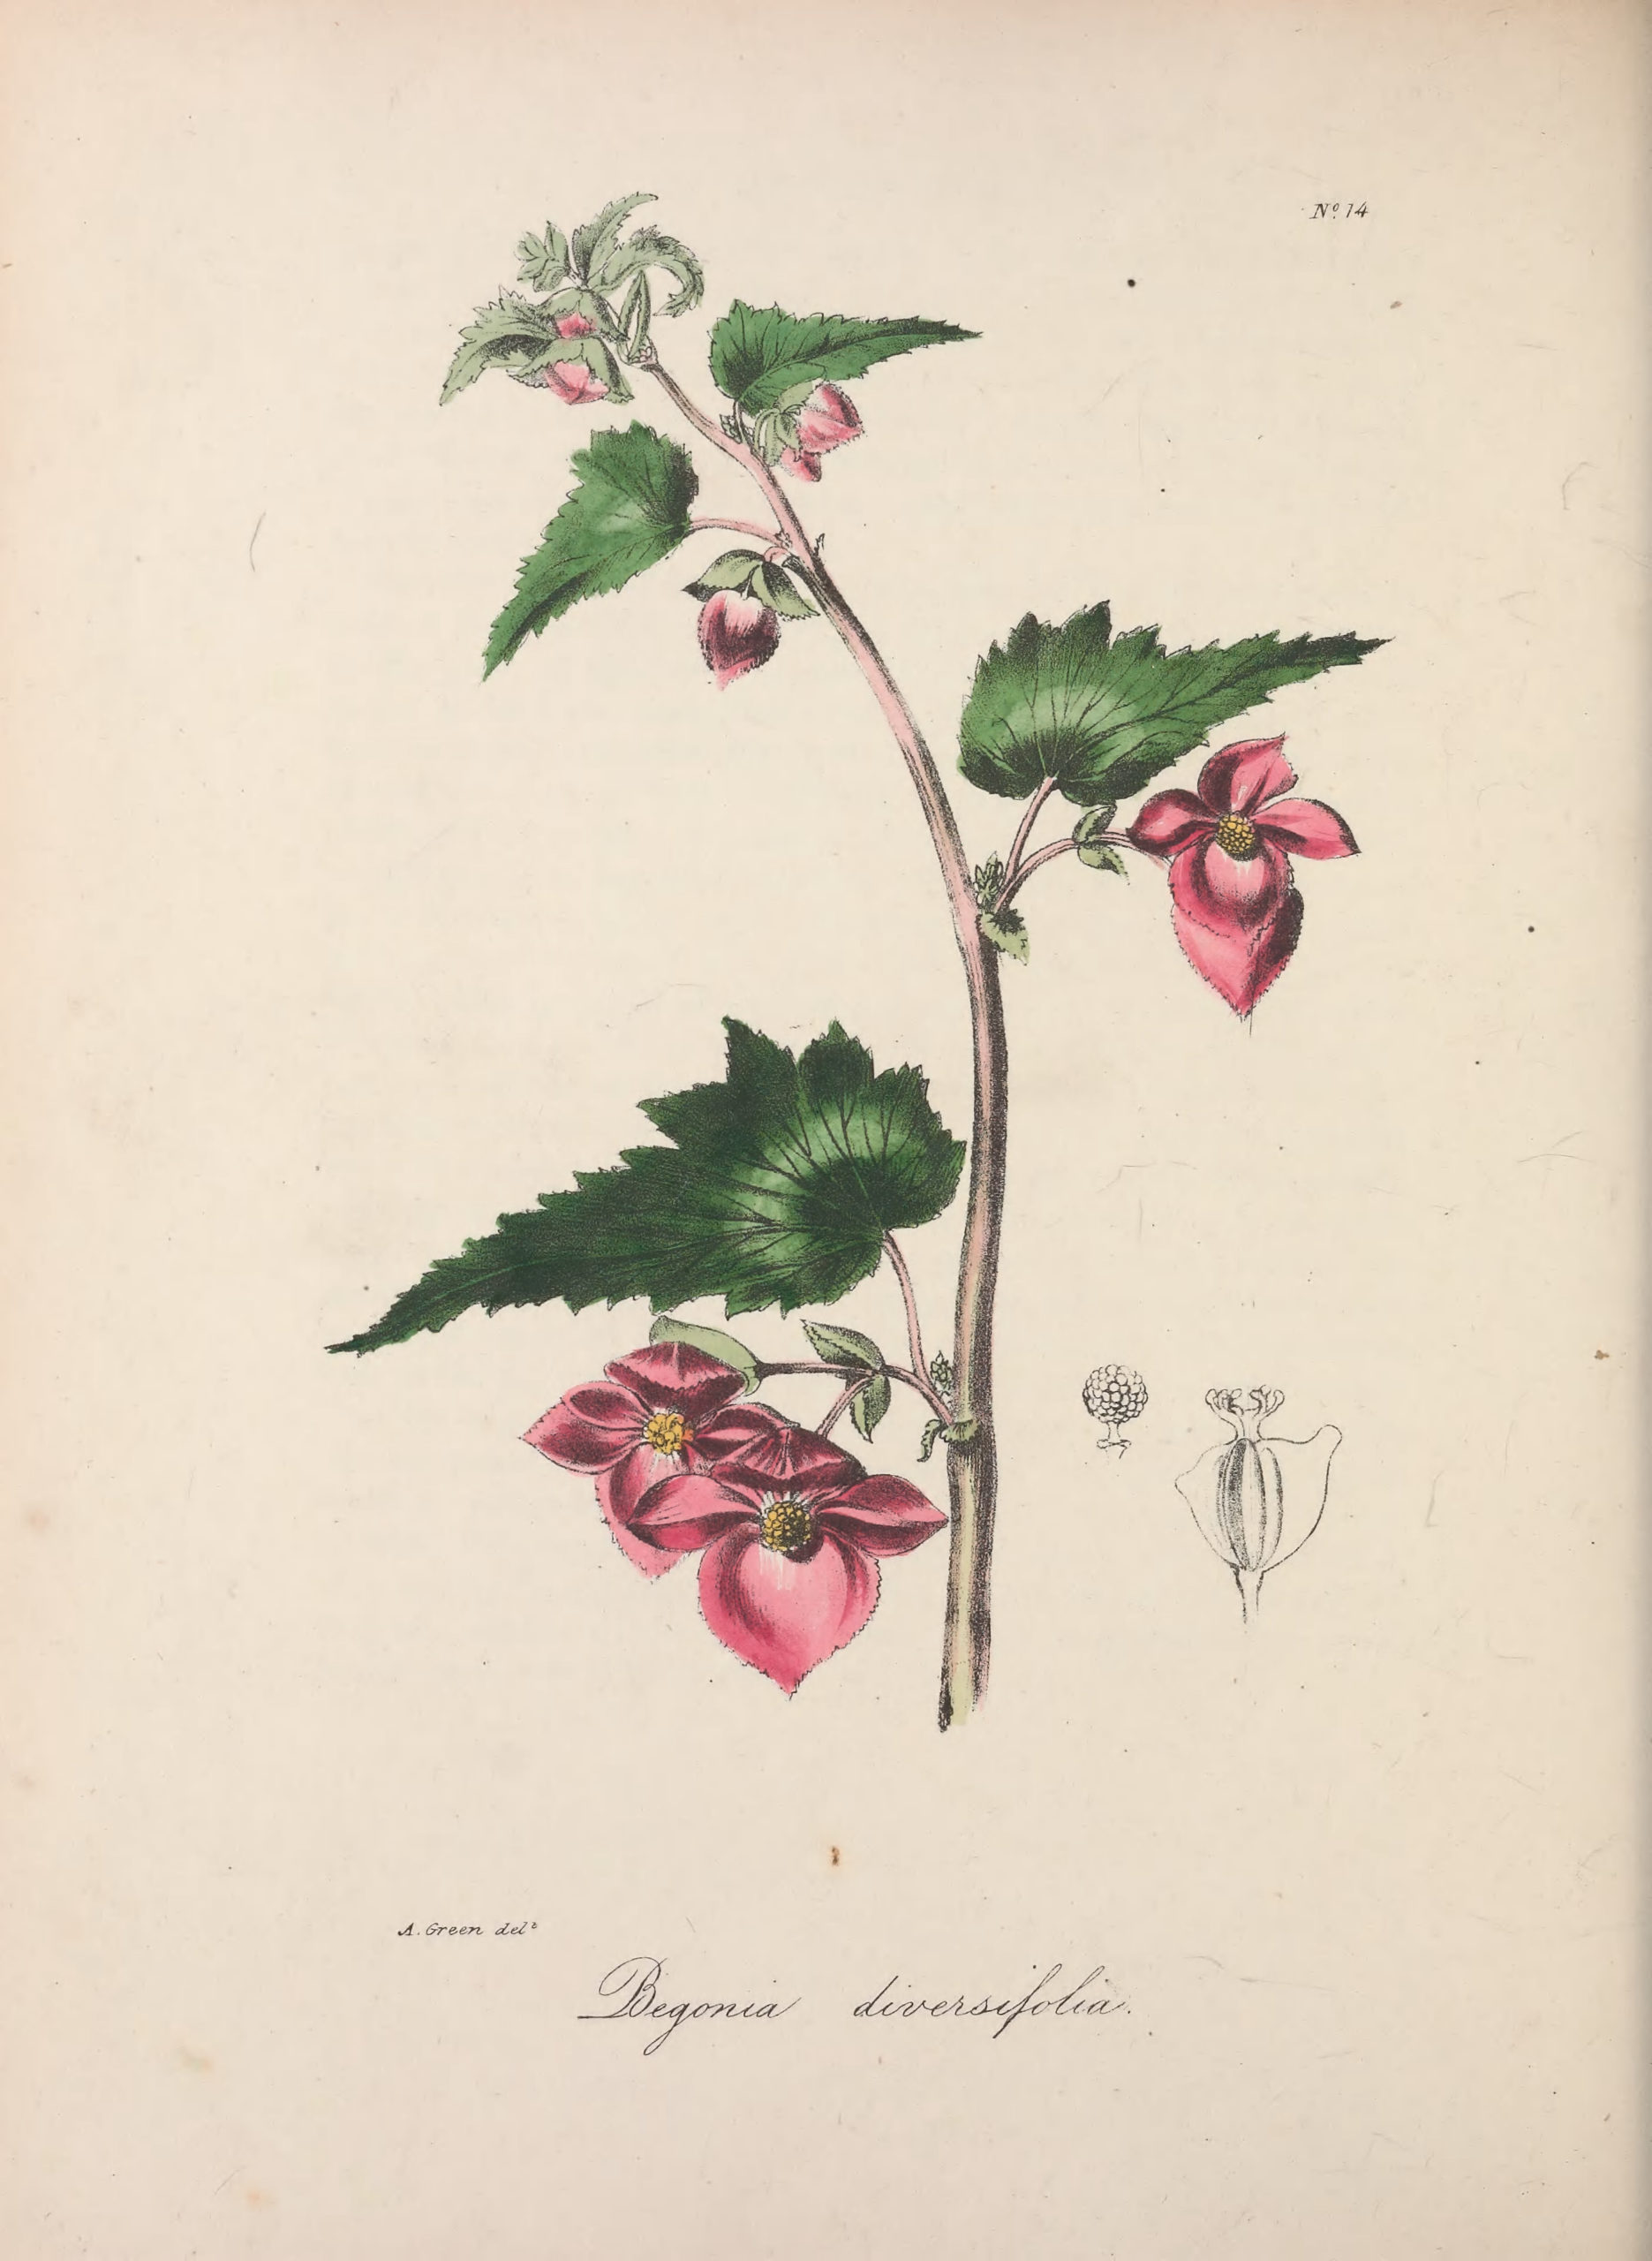 Vintage Botanical Prints - 45 in a series - Begonia diversifolia from The floral cabinet and magazine of exotic botany (1837)